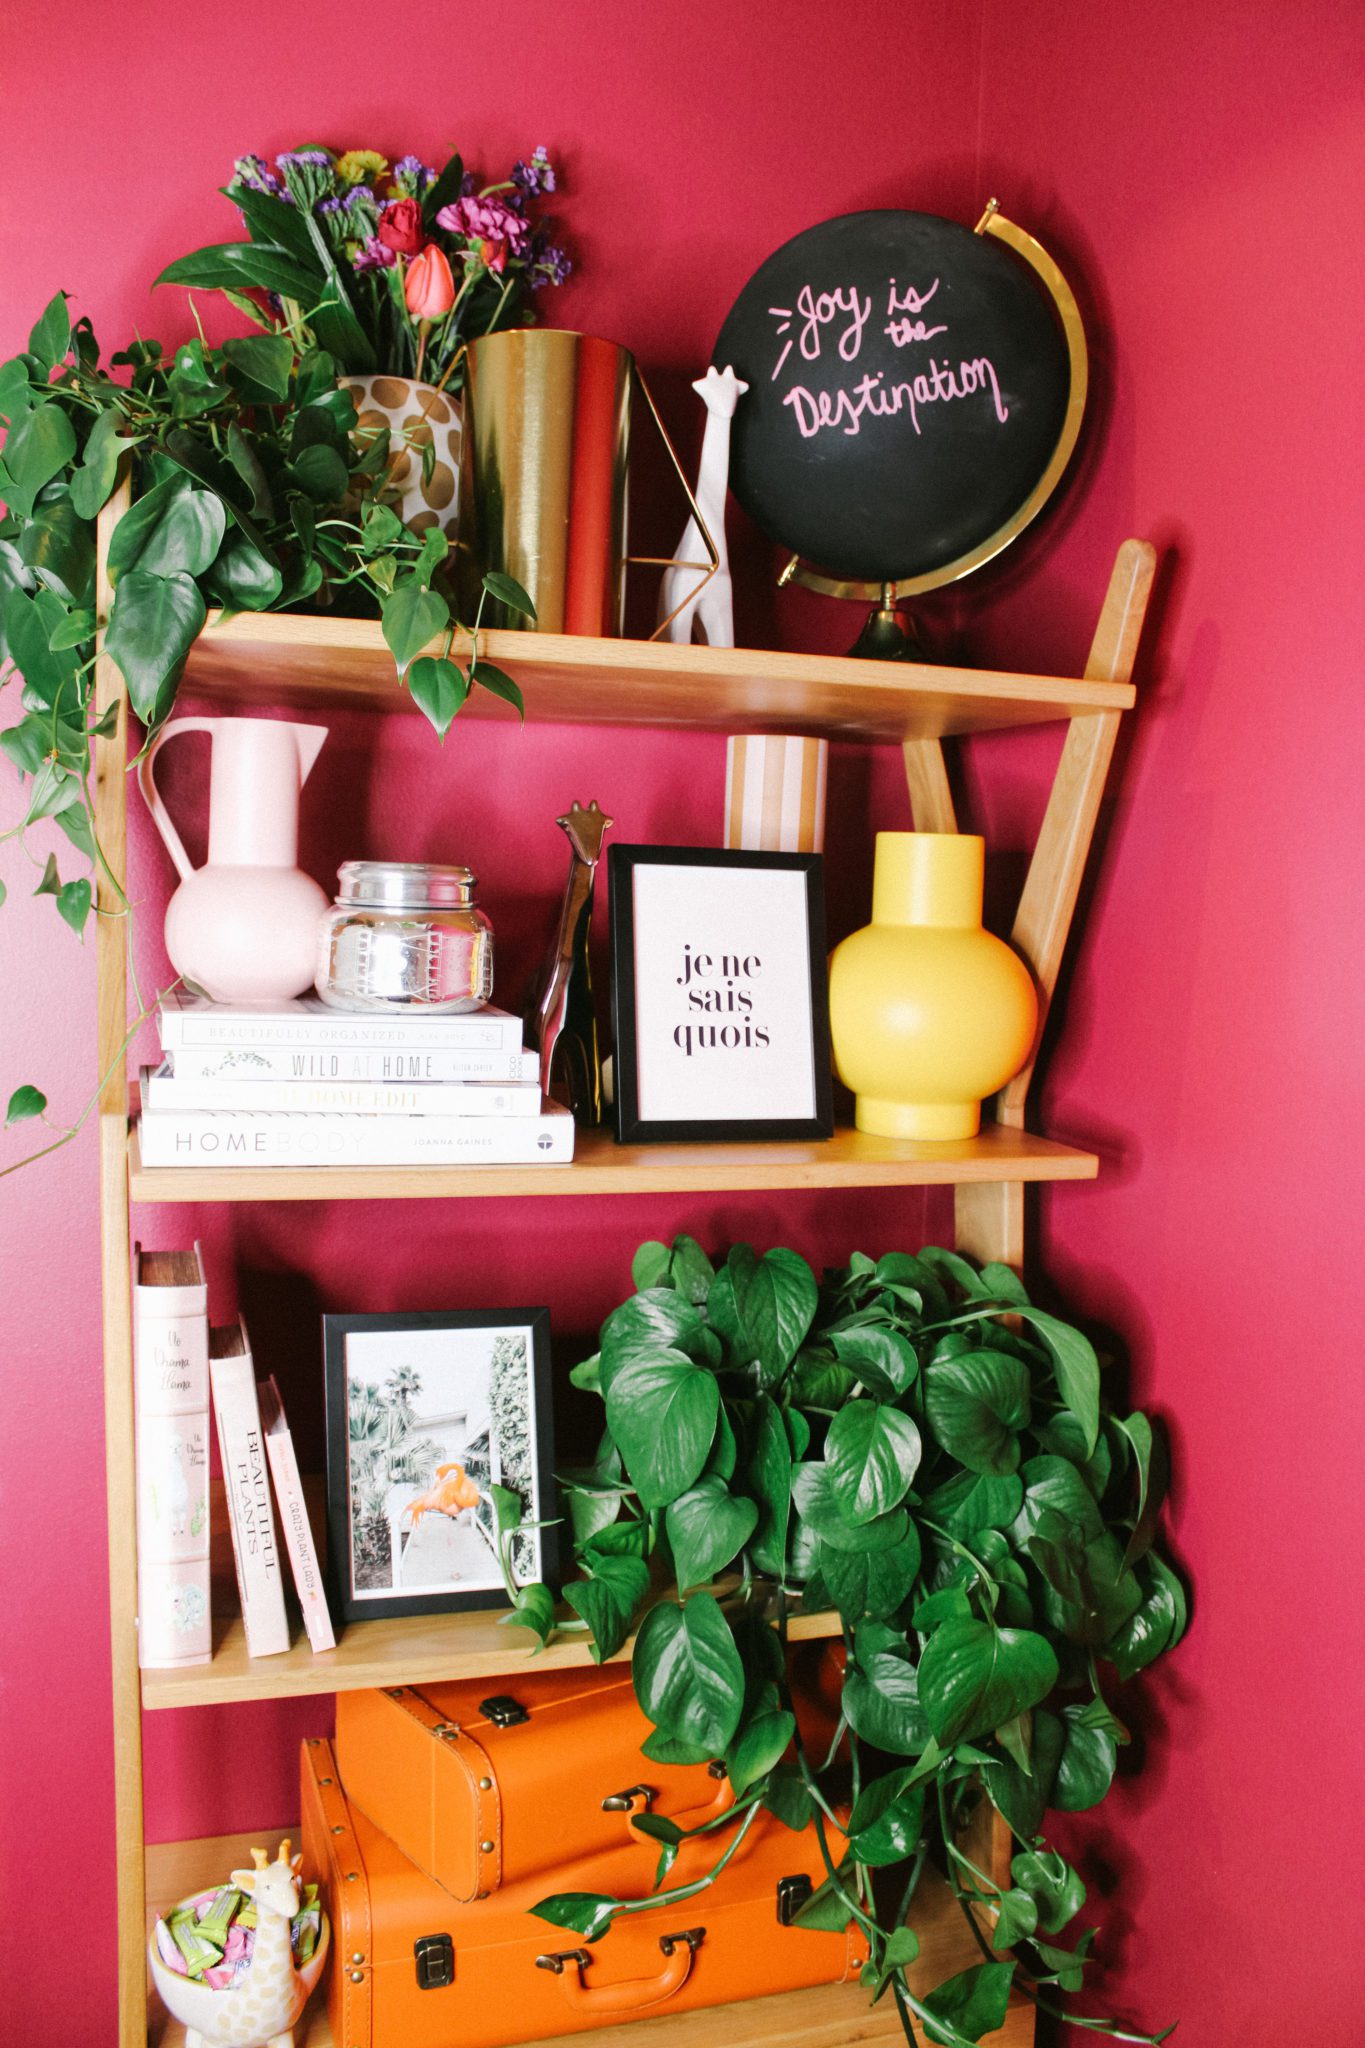 4 Foolproof Tips for Styling a Bookshelf That’s Anything but Bland